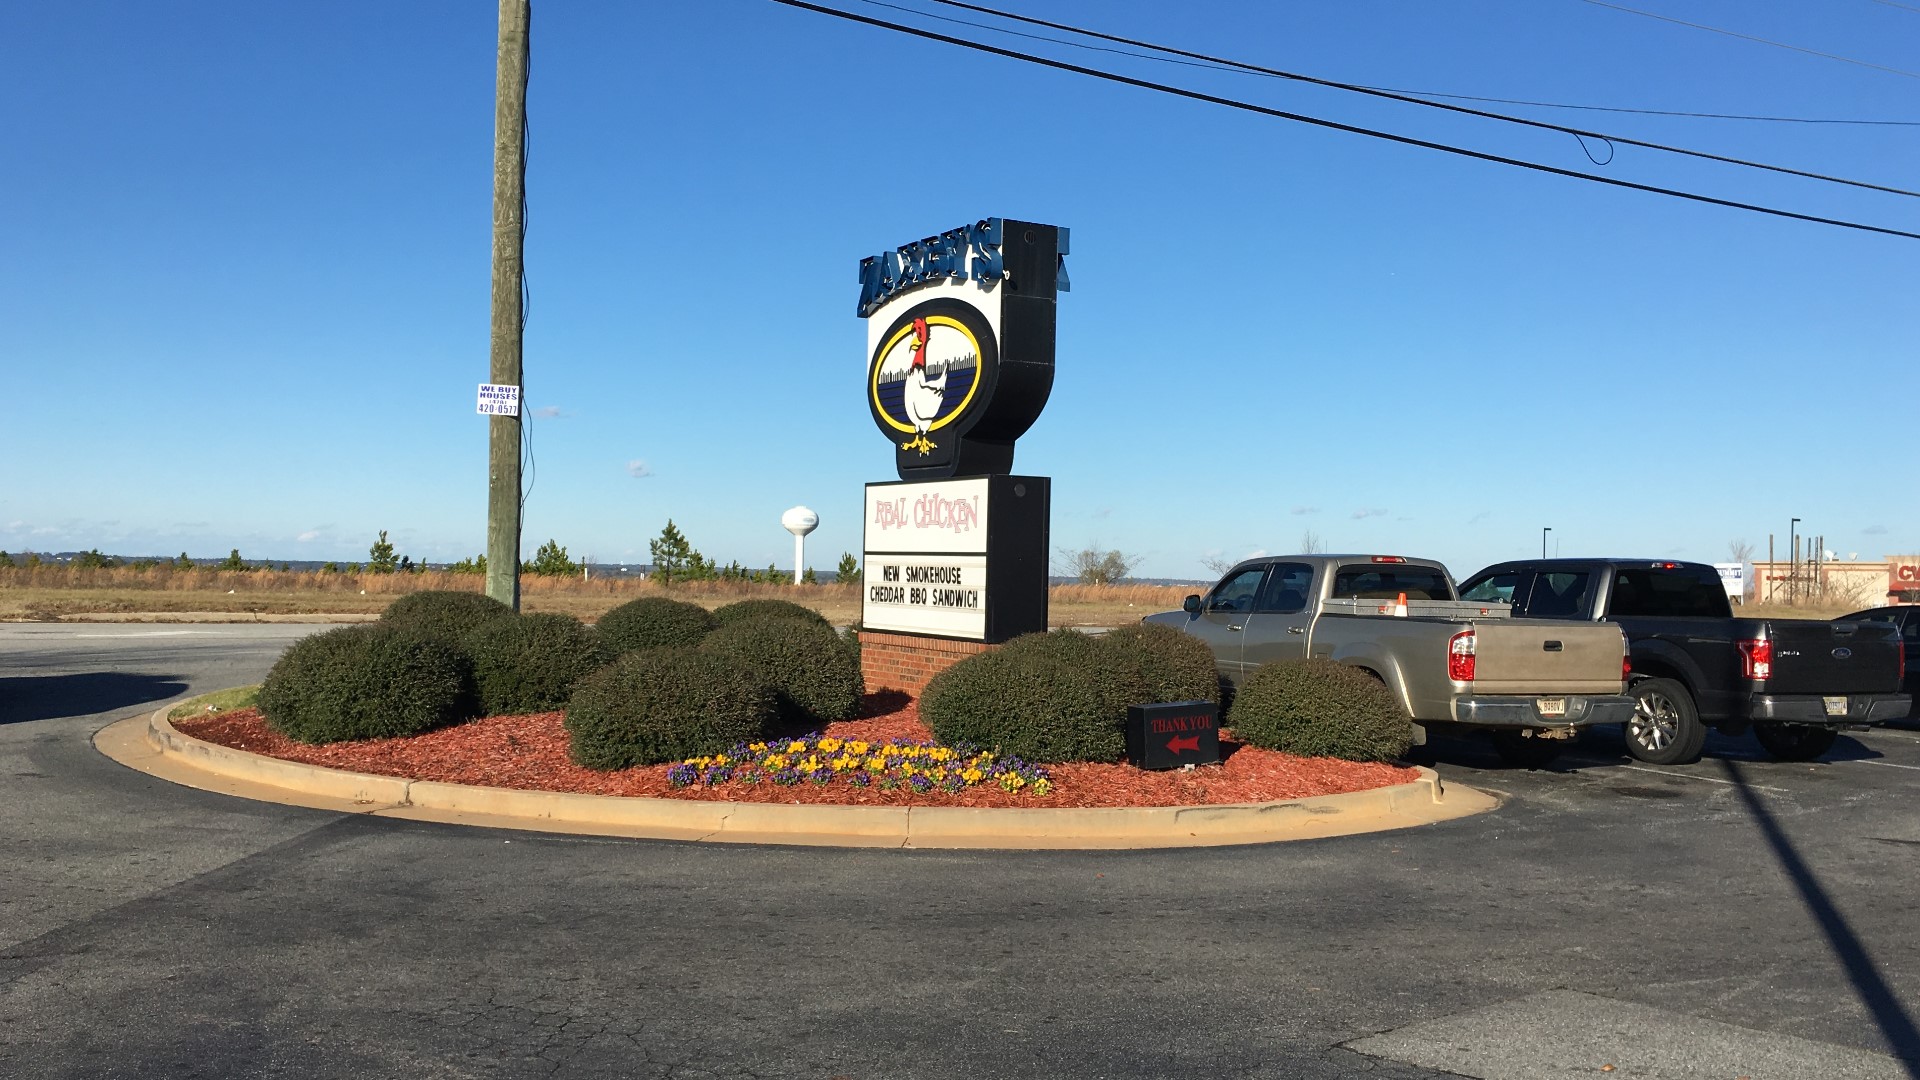 A Zaxby's employee was about to get in his car with a deposit bag. That's when a masked man showed a gun and demanded the bag from the employee.